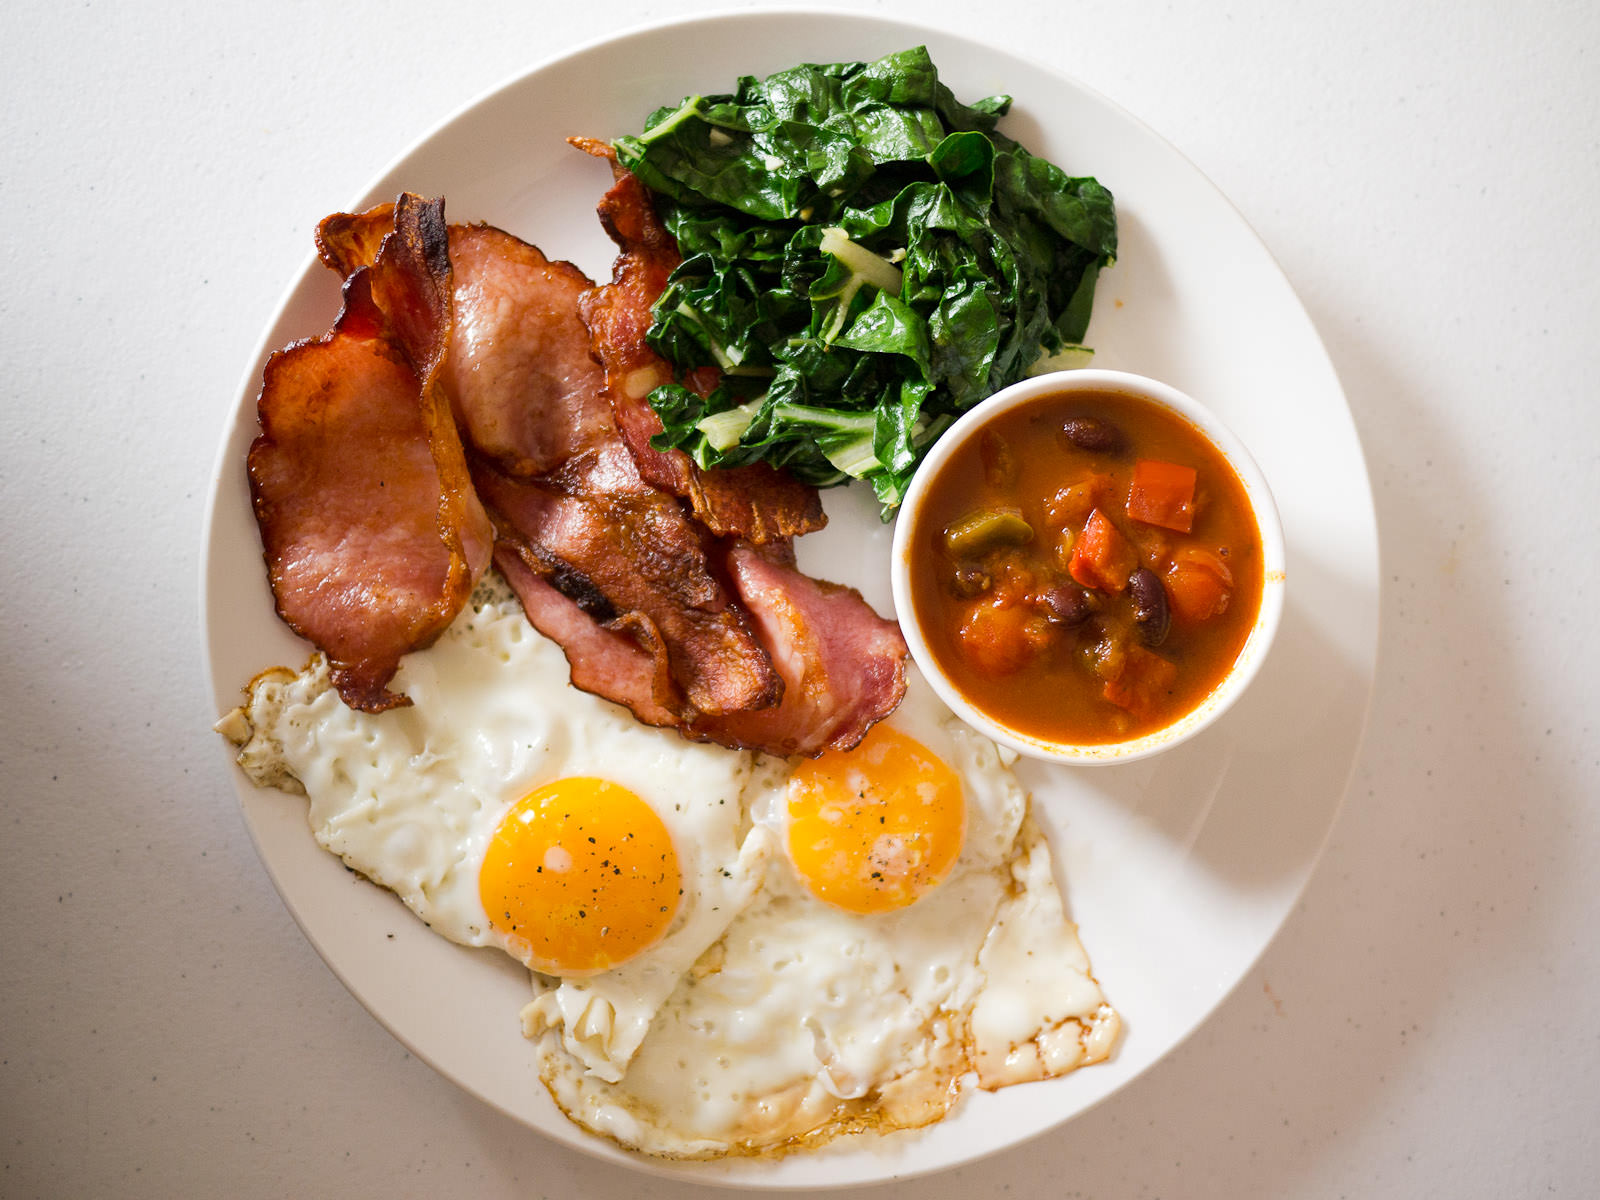 Fried eggs, bacon, garlic silverbeet, and spicy tomato, capsicum and beans